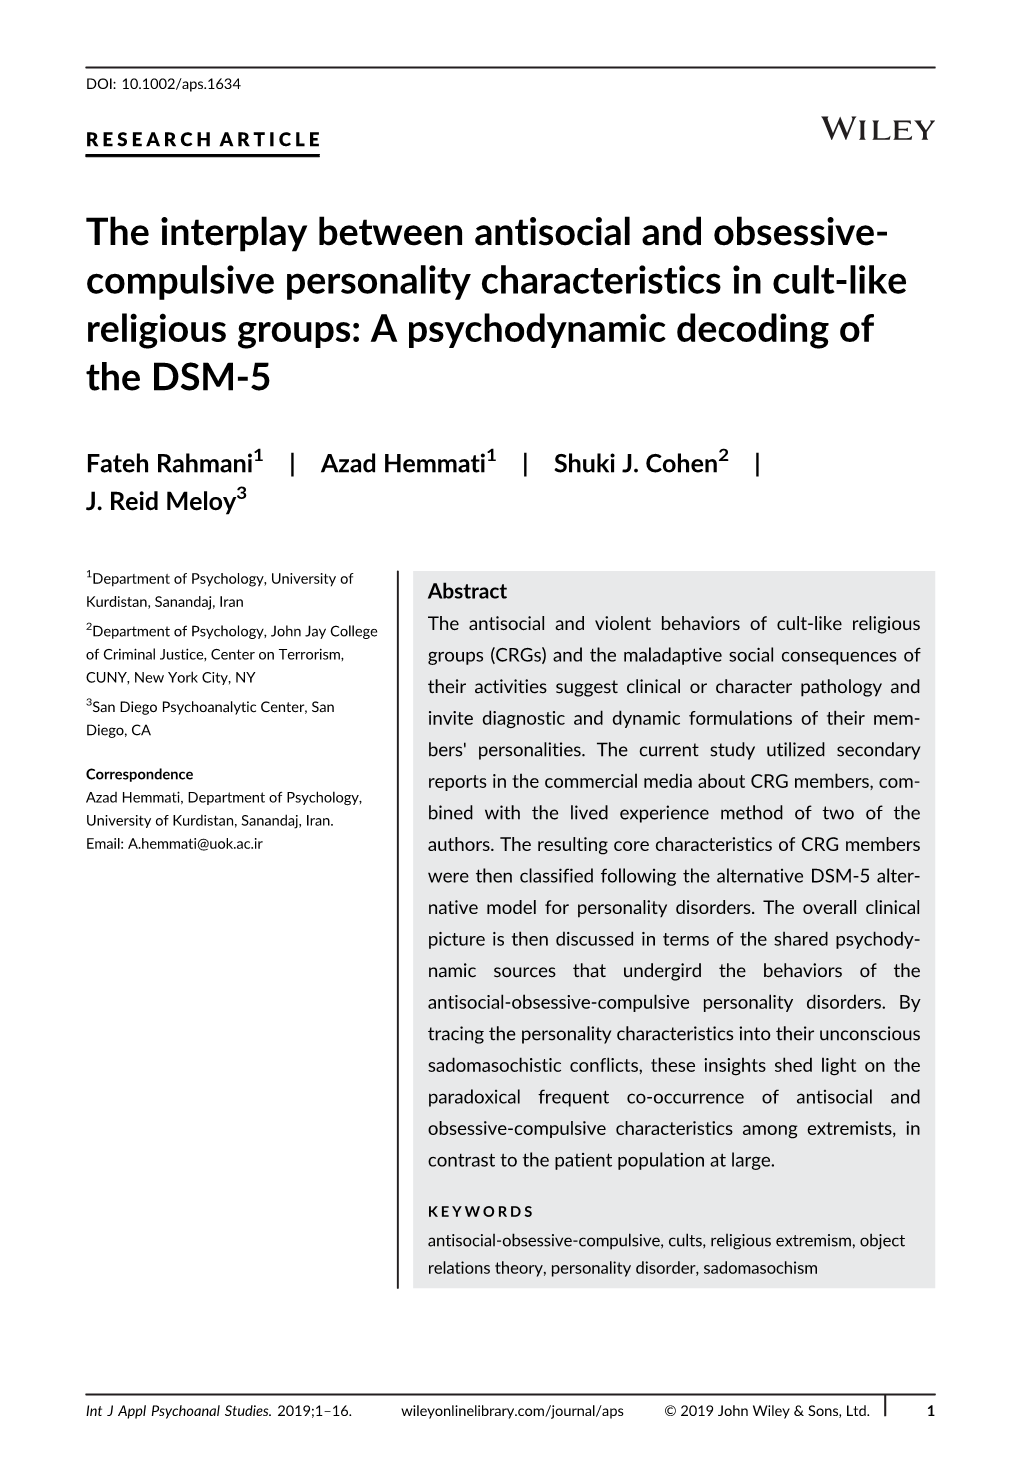 The Interplay Between Antisocial and Obsessive- Compulsive Personality Characteristics in Cult-Like Religious Groups: a Psychodynamic Decoding of the DSM-5